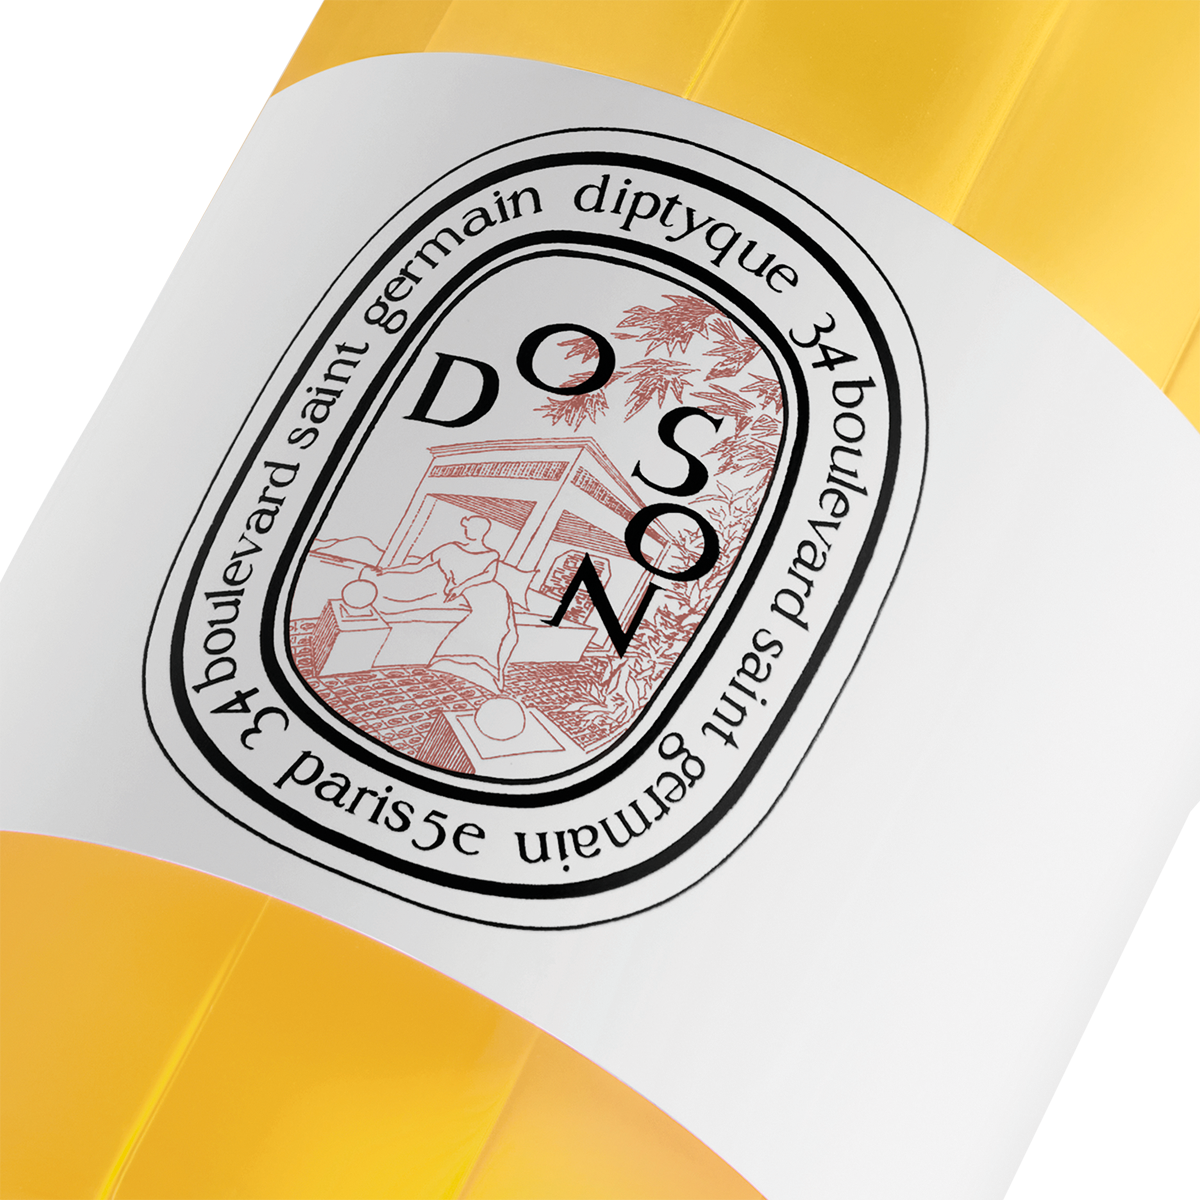 Diptyque - Do Son Shower Oil Limited